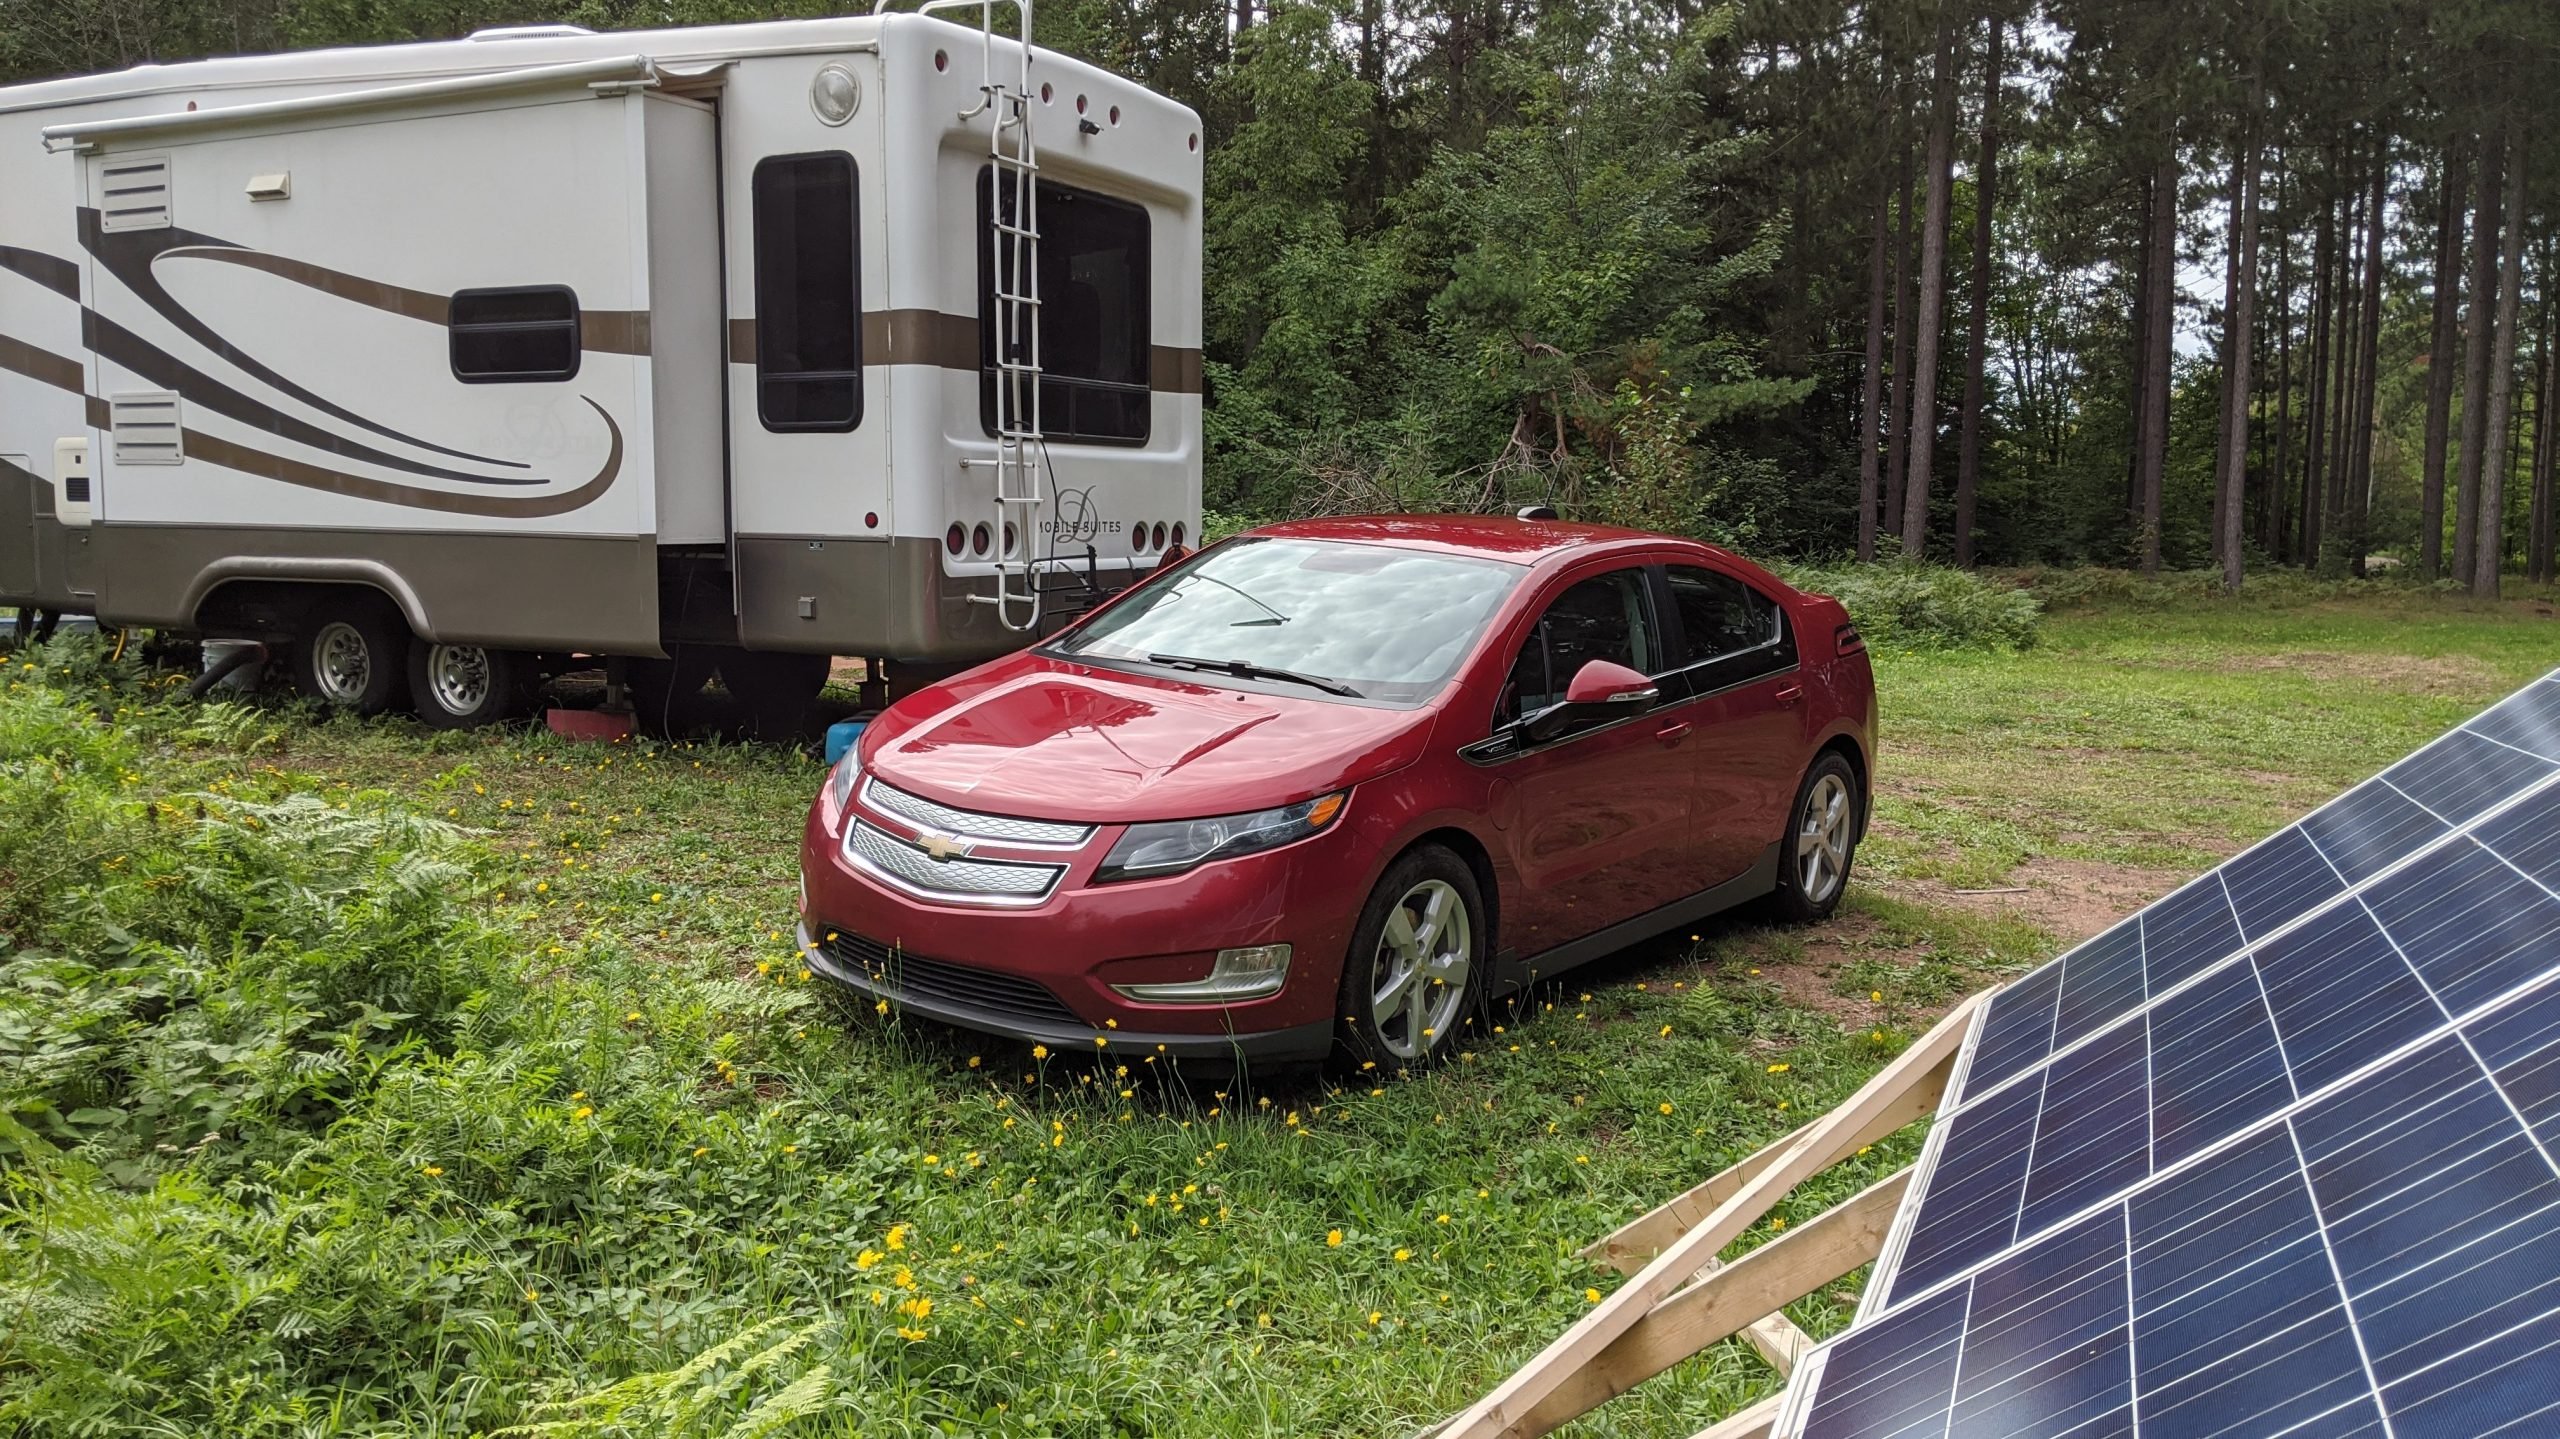 solar-powered car charged from rv